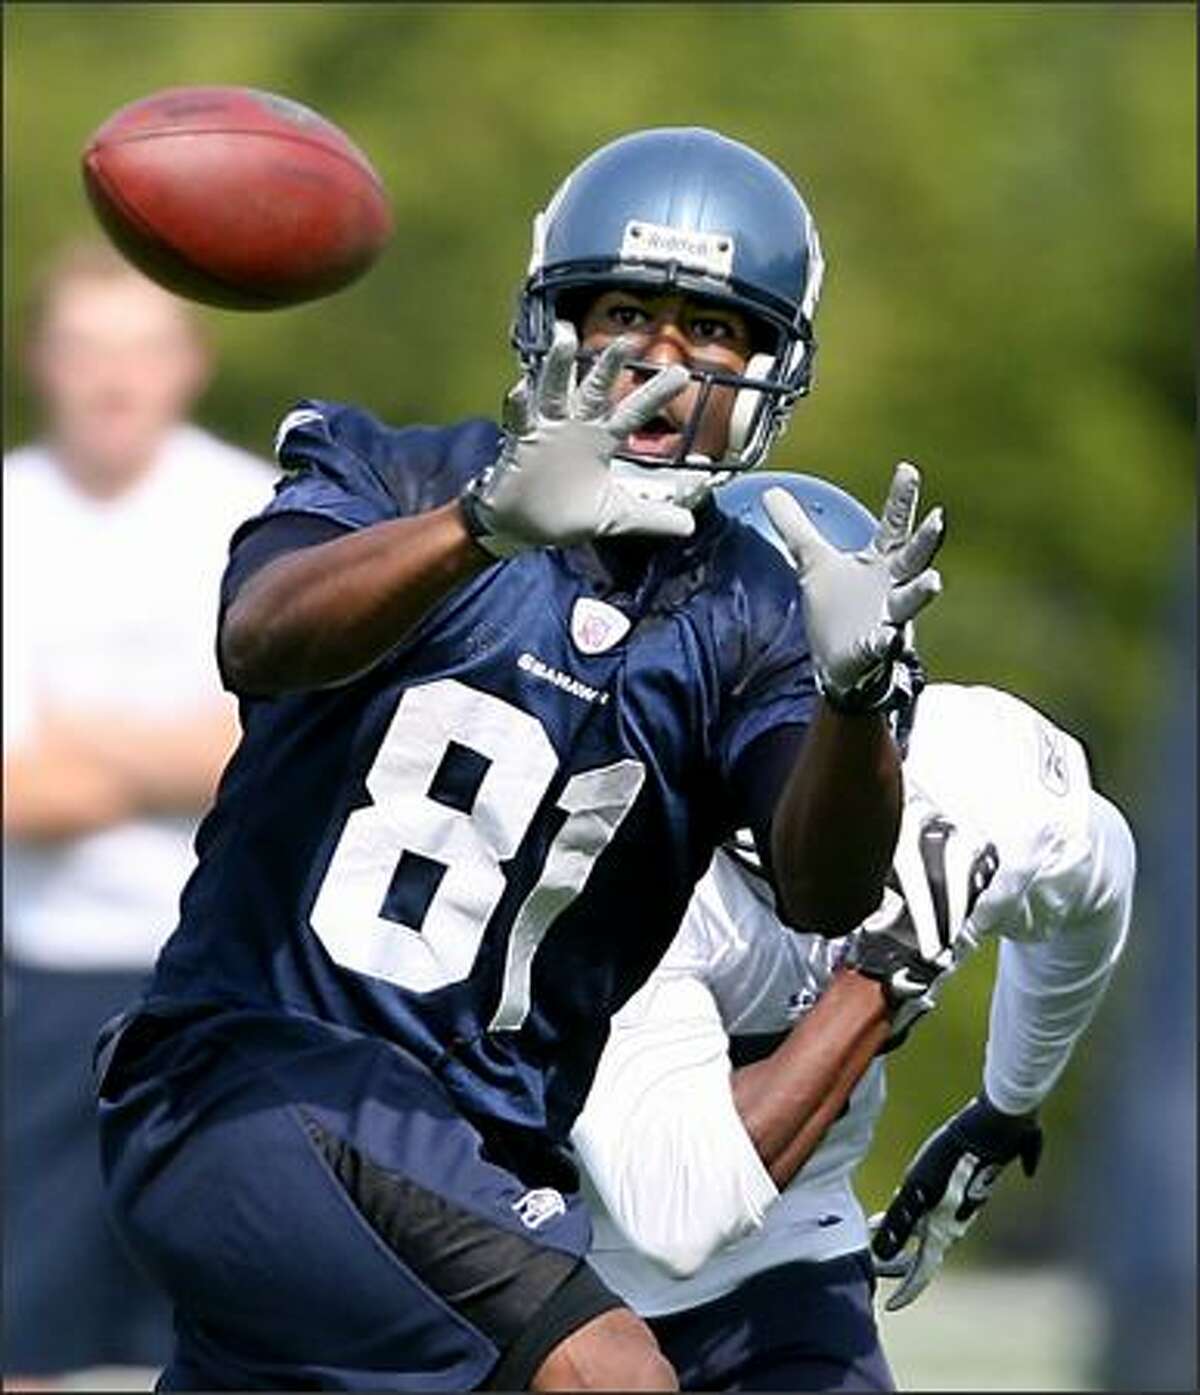 Wide Receiver Nate Burleson hauls in a pass in front of cornerback Kelly Jennings as the Seattle Seahawks hold the first practice of their 2008 season training camp at their Kirkland, Wash., headquarters Friday.